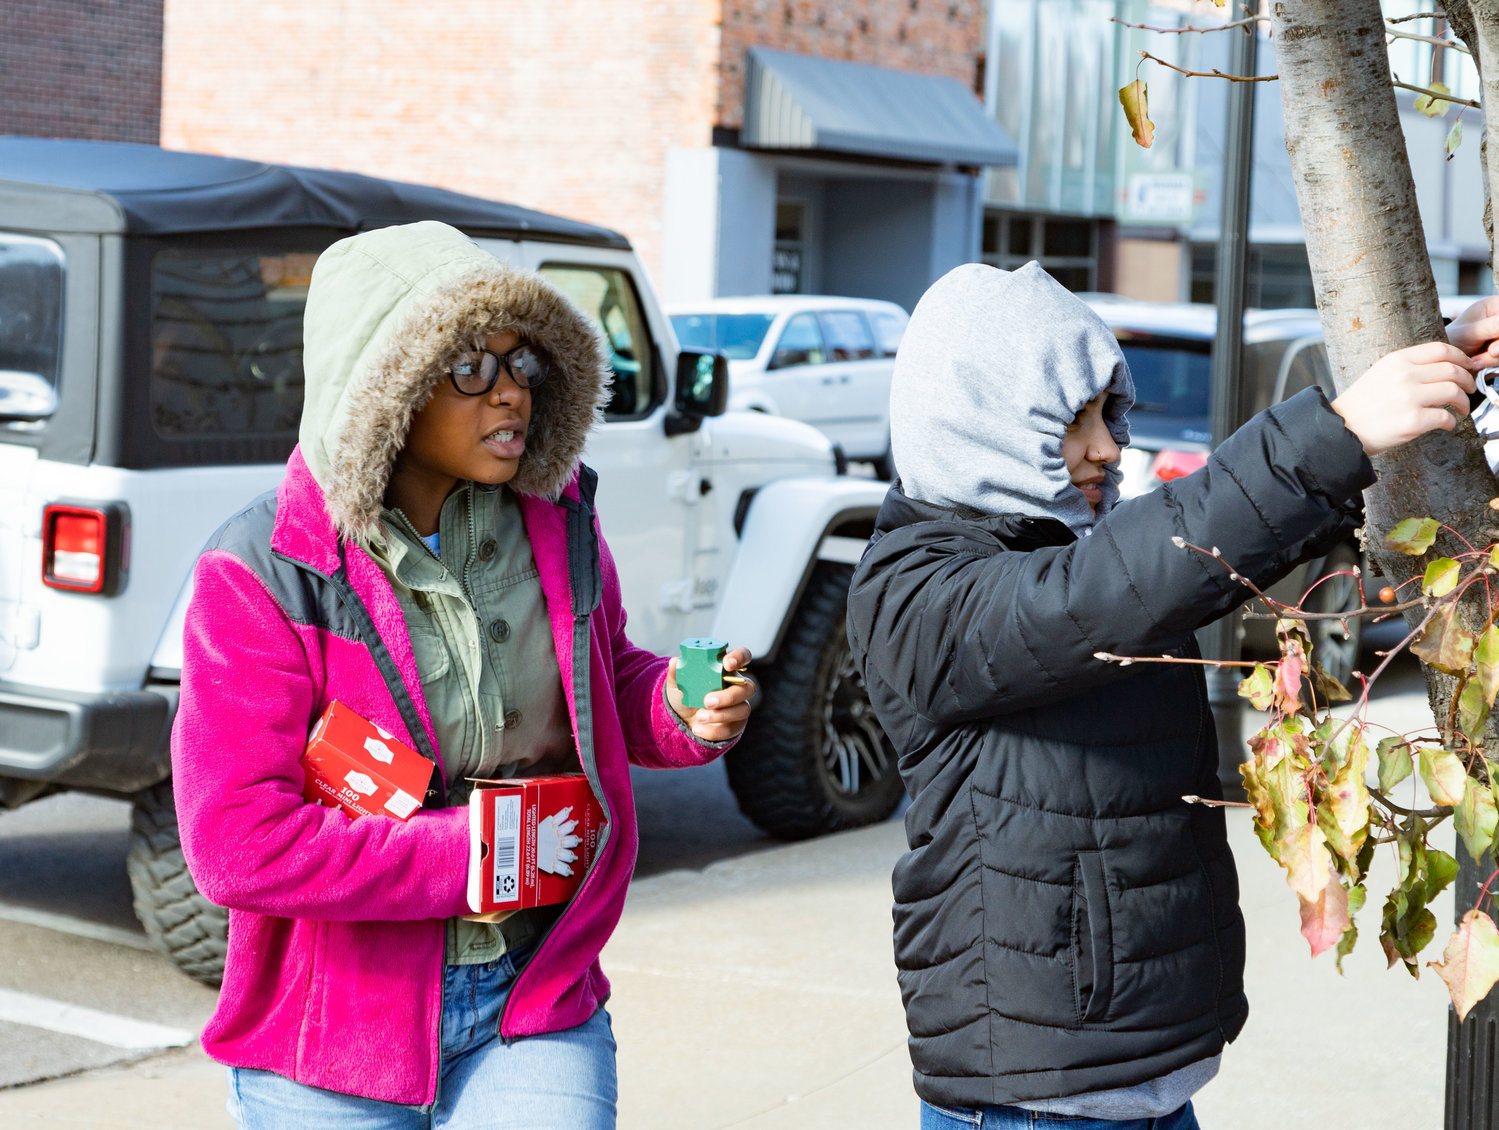 Juniors Nila Winn and Selina Minnis put lights on a tree in downtown Moberly. More than 100 high school students helped decorate downtown Friday.